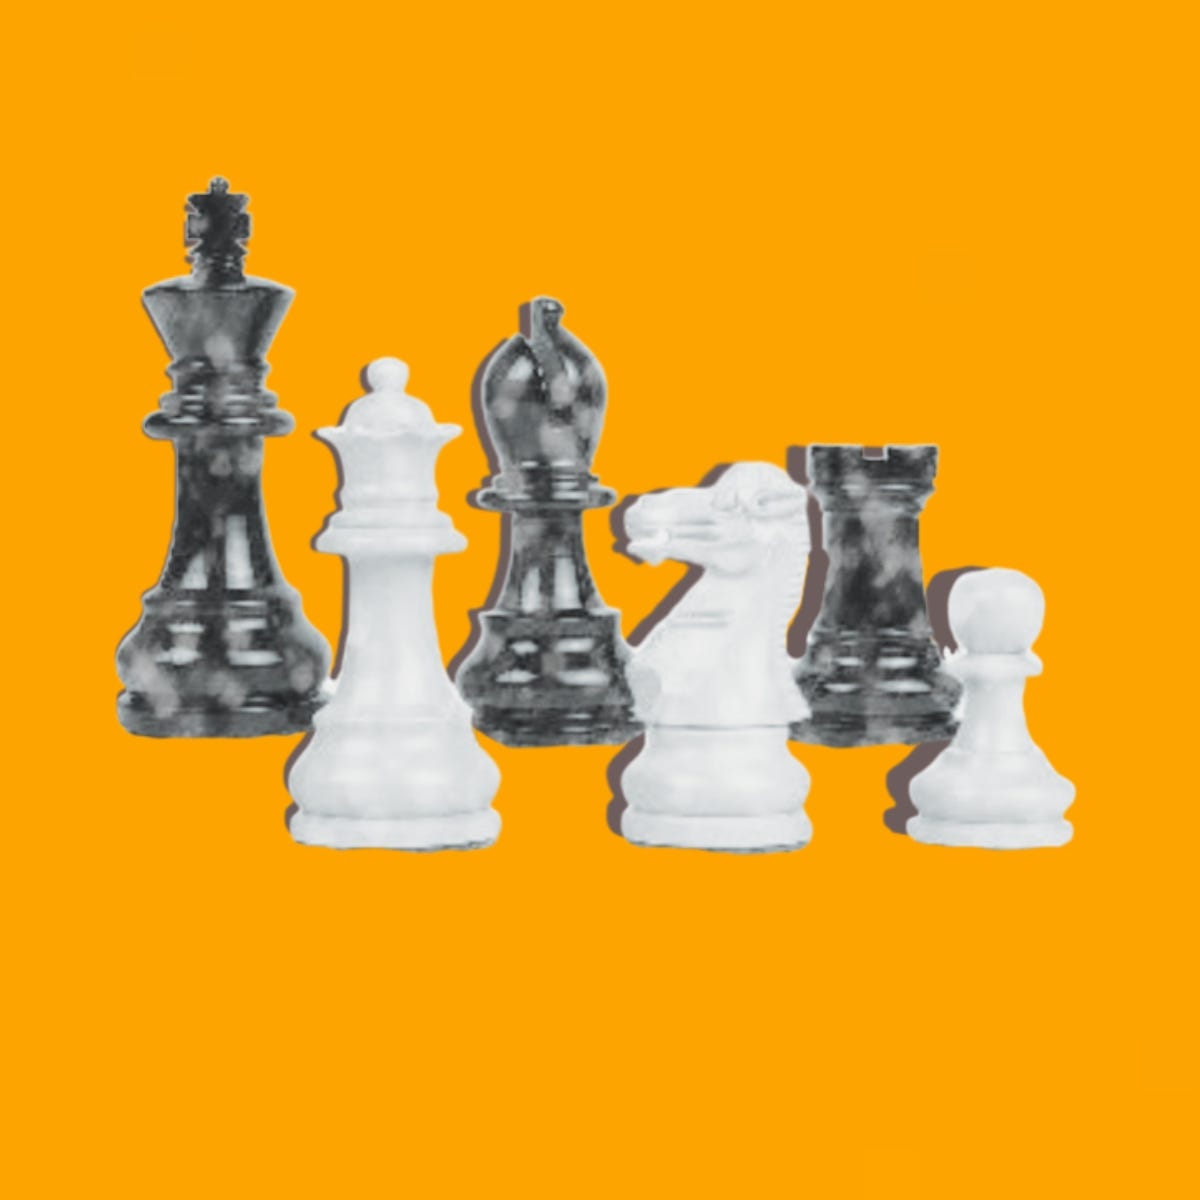 An illustration of chess pieces.